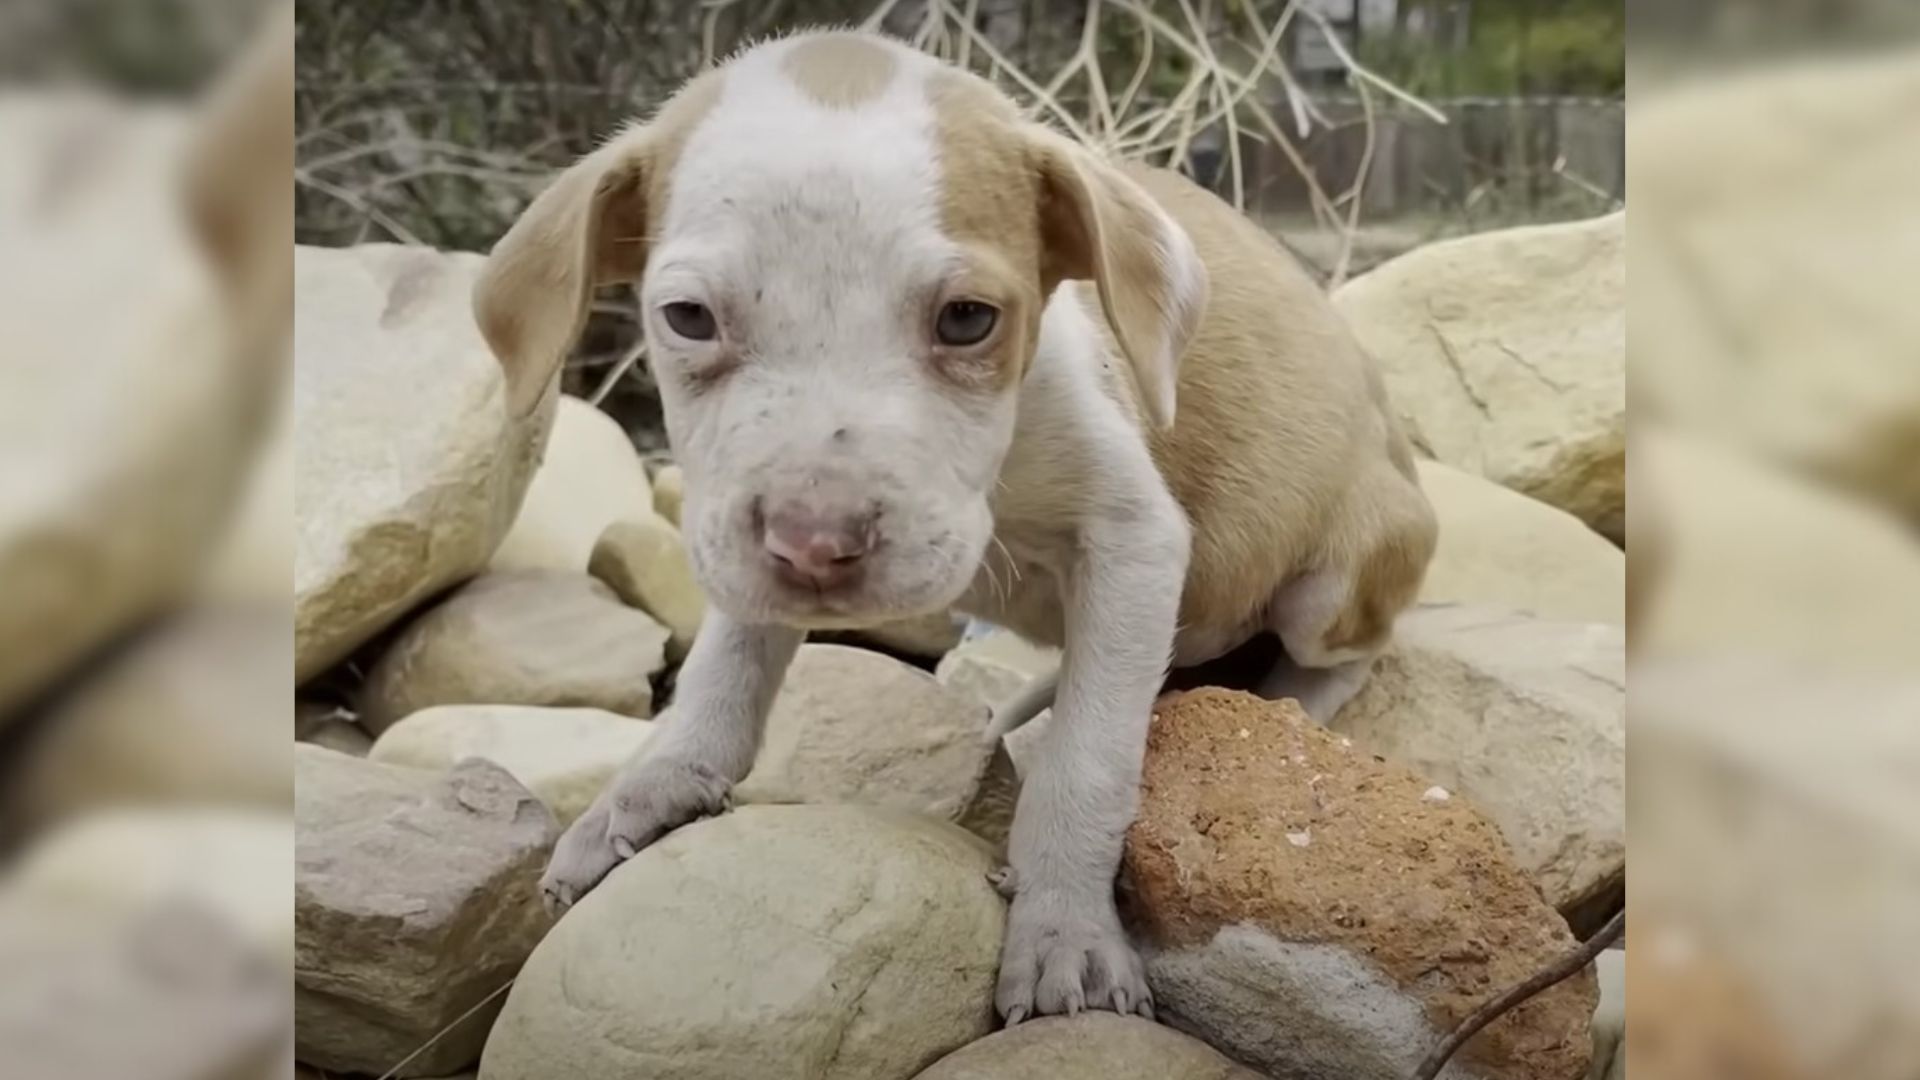 Pitty Puppy Couldn’t Stop Shaking Until He Found A Cat He Enjoyed Wrestling With